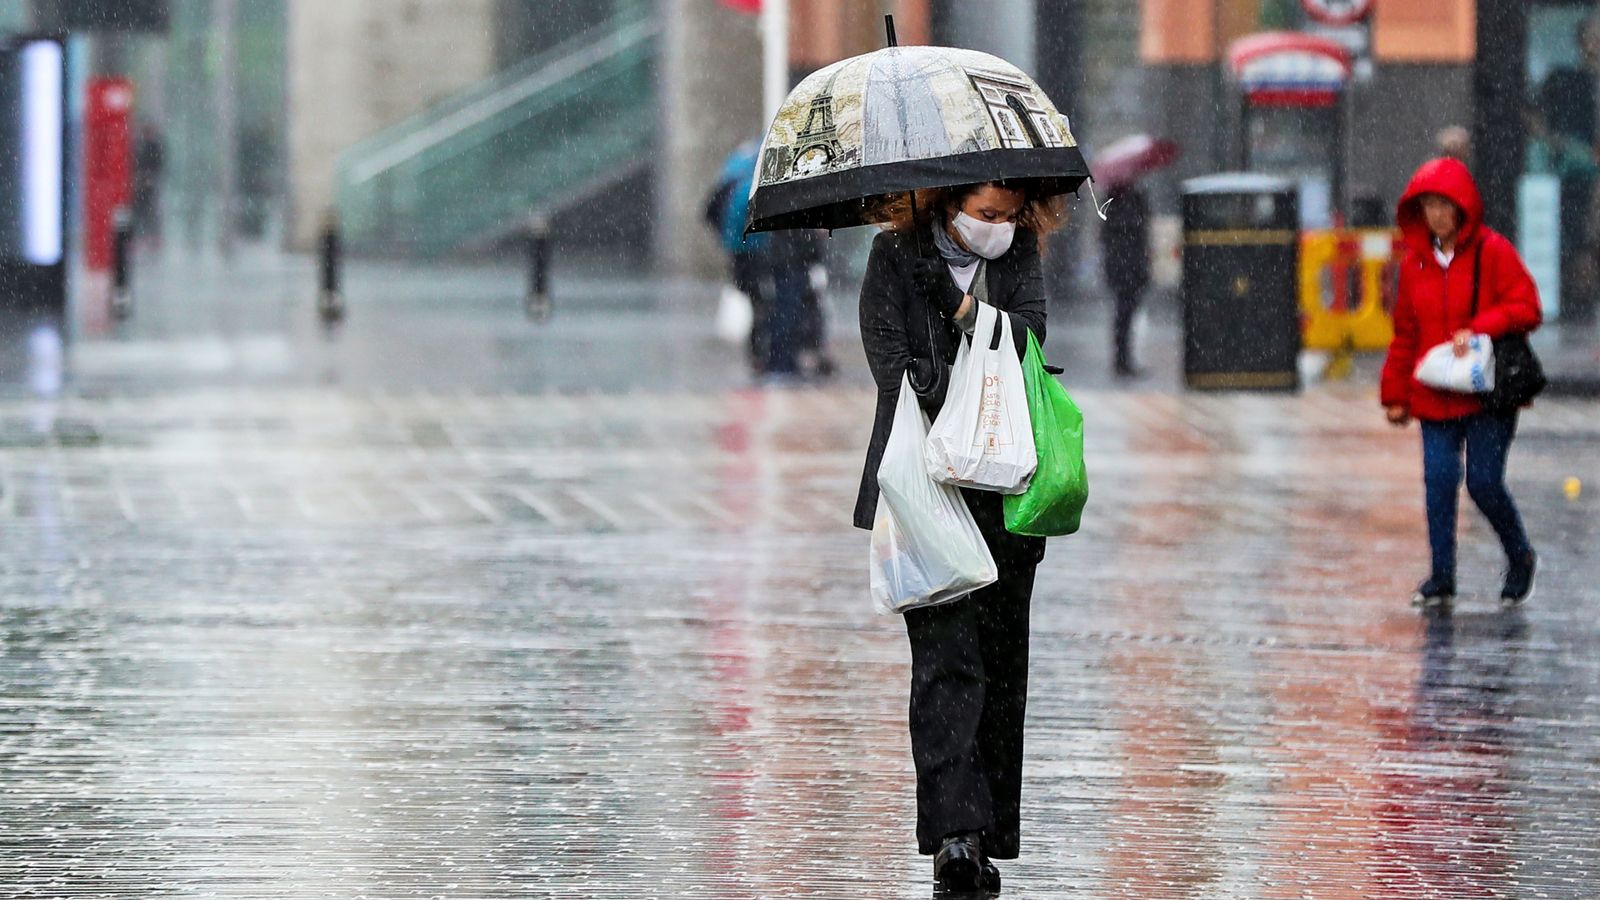 UK weather Britain facing its coldest August bank holiday on record